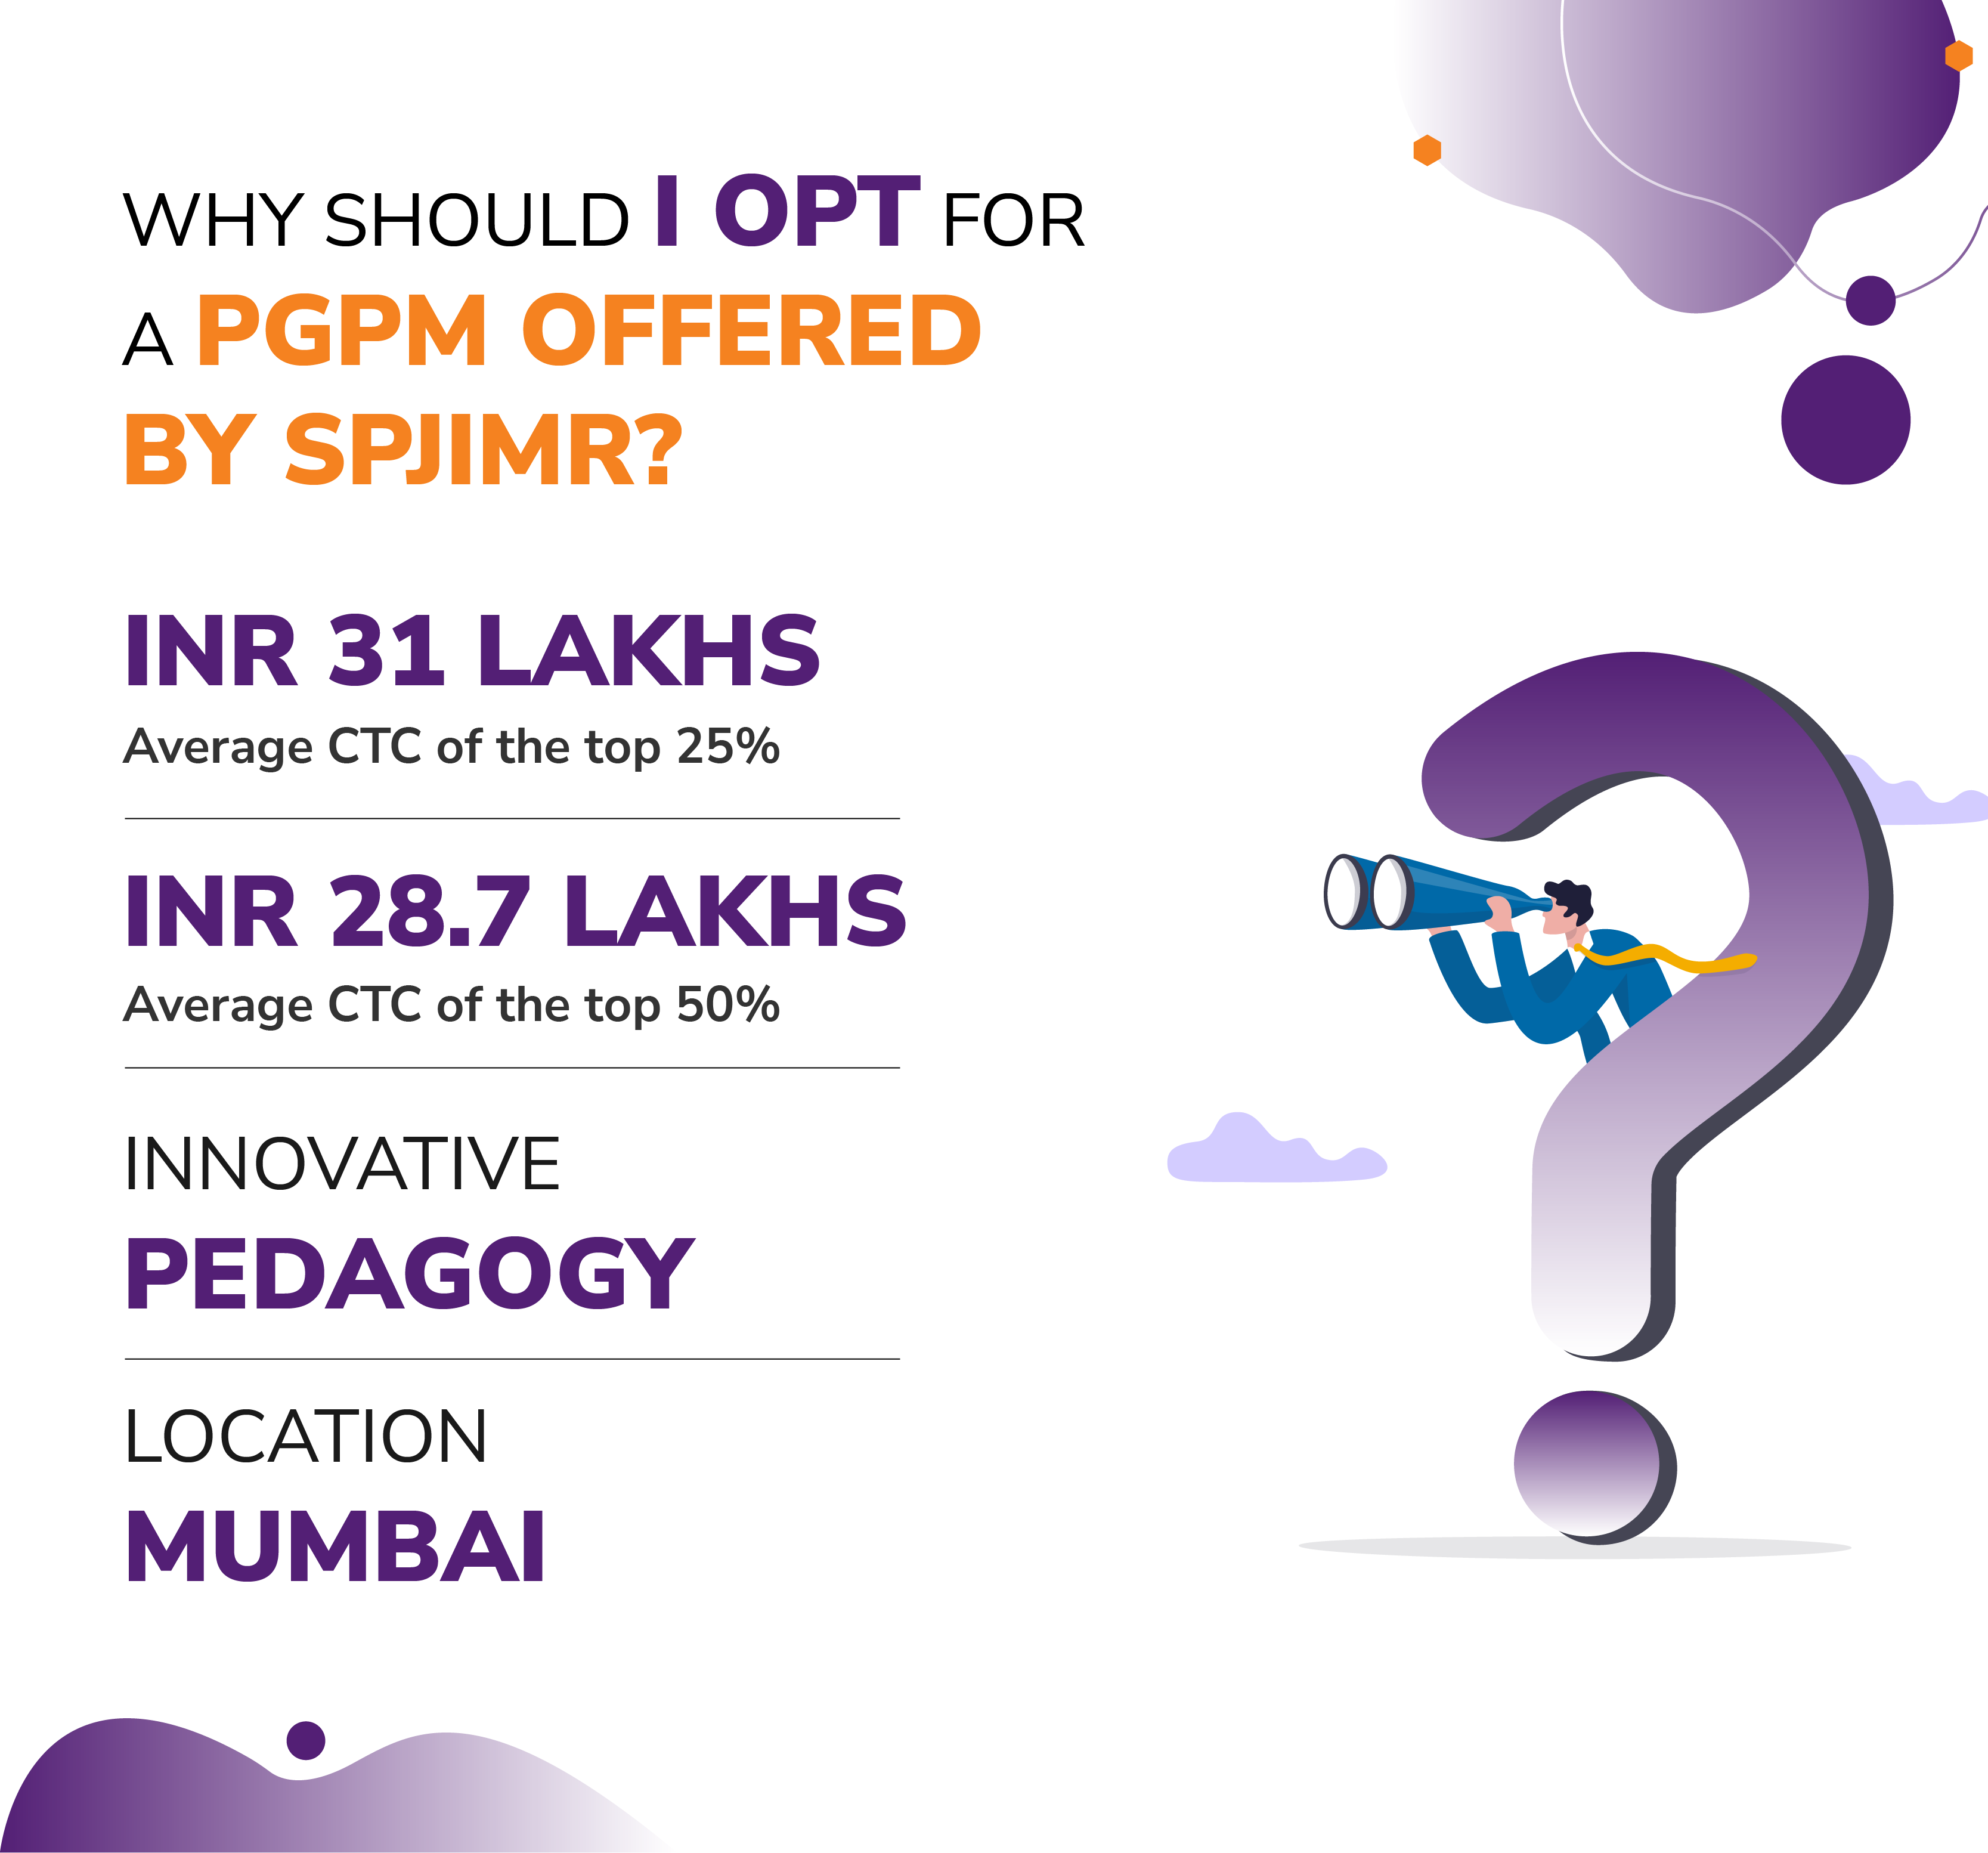 WHY-SHOULD-I-OPT-FOR-A-PGPM-OFFERED-BY-SPJIMR